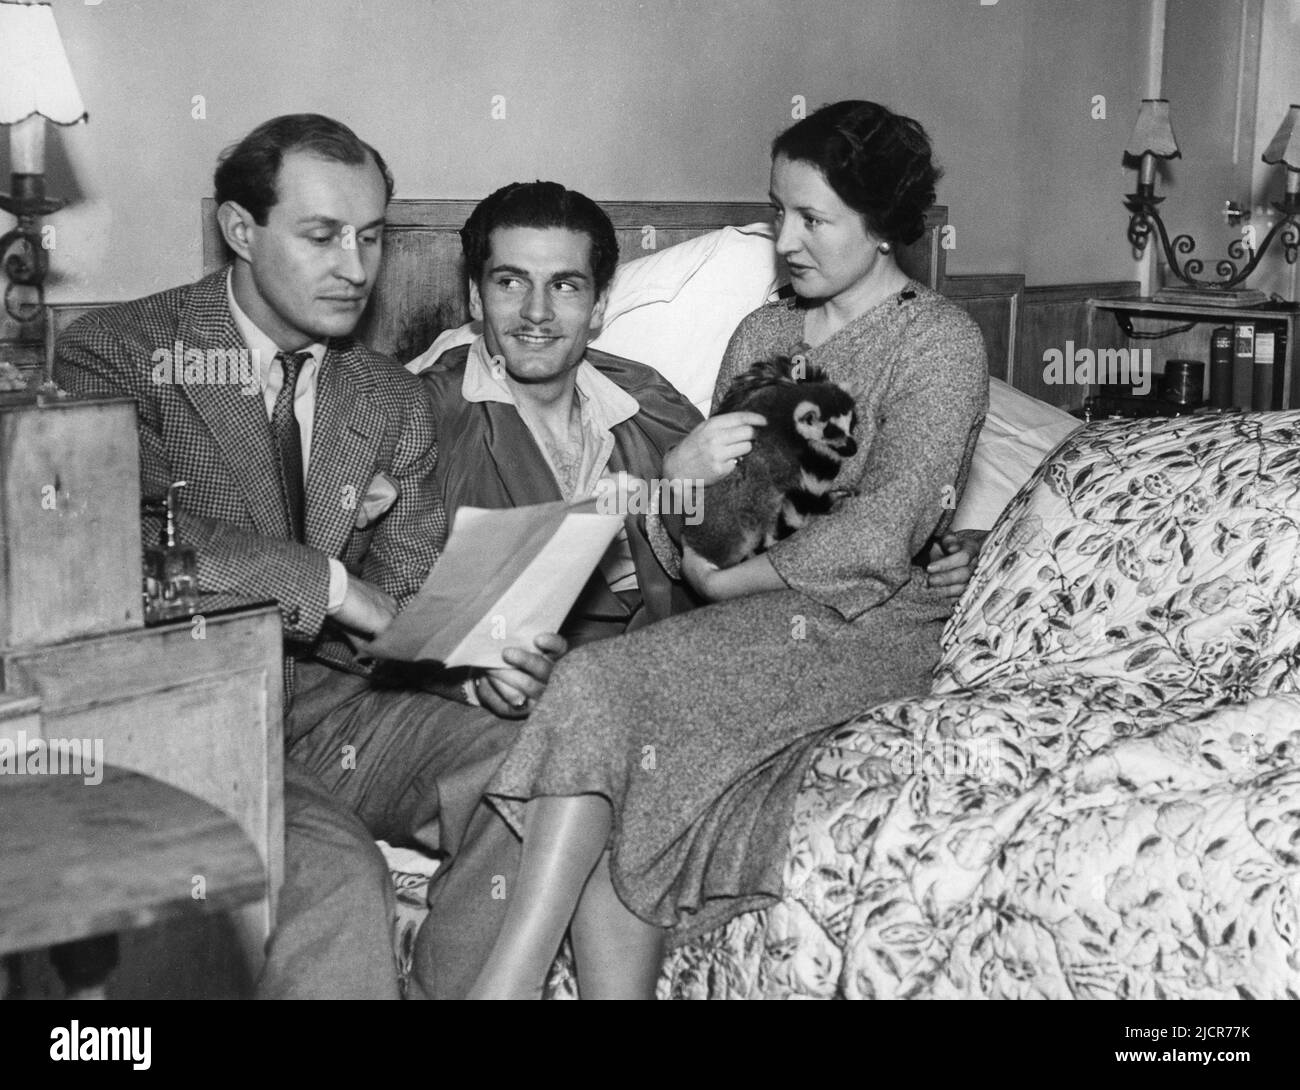 ROBERT DOUGLAS in December 1934 being coached by an injured LAURENCE OLIVIER for the part of Tony Cavendish in the original London stage presentation of THEATRE ROYAL (THE ROYAL FAMILY in US) written by George S. Kaufman and Edna Ferber and directed by no0el Coward at the Lyric Theatre, Shaftesbury Avenue, London. Looking on is Olivier's 1st wife JILL  ESMOND holding their pet Lemur TONY Stock Photo